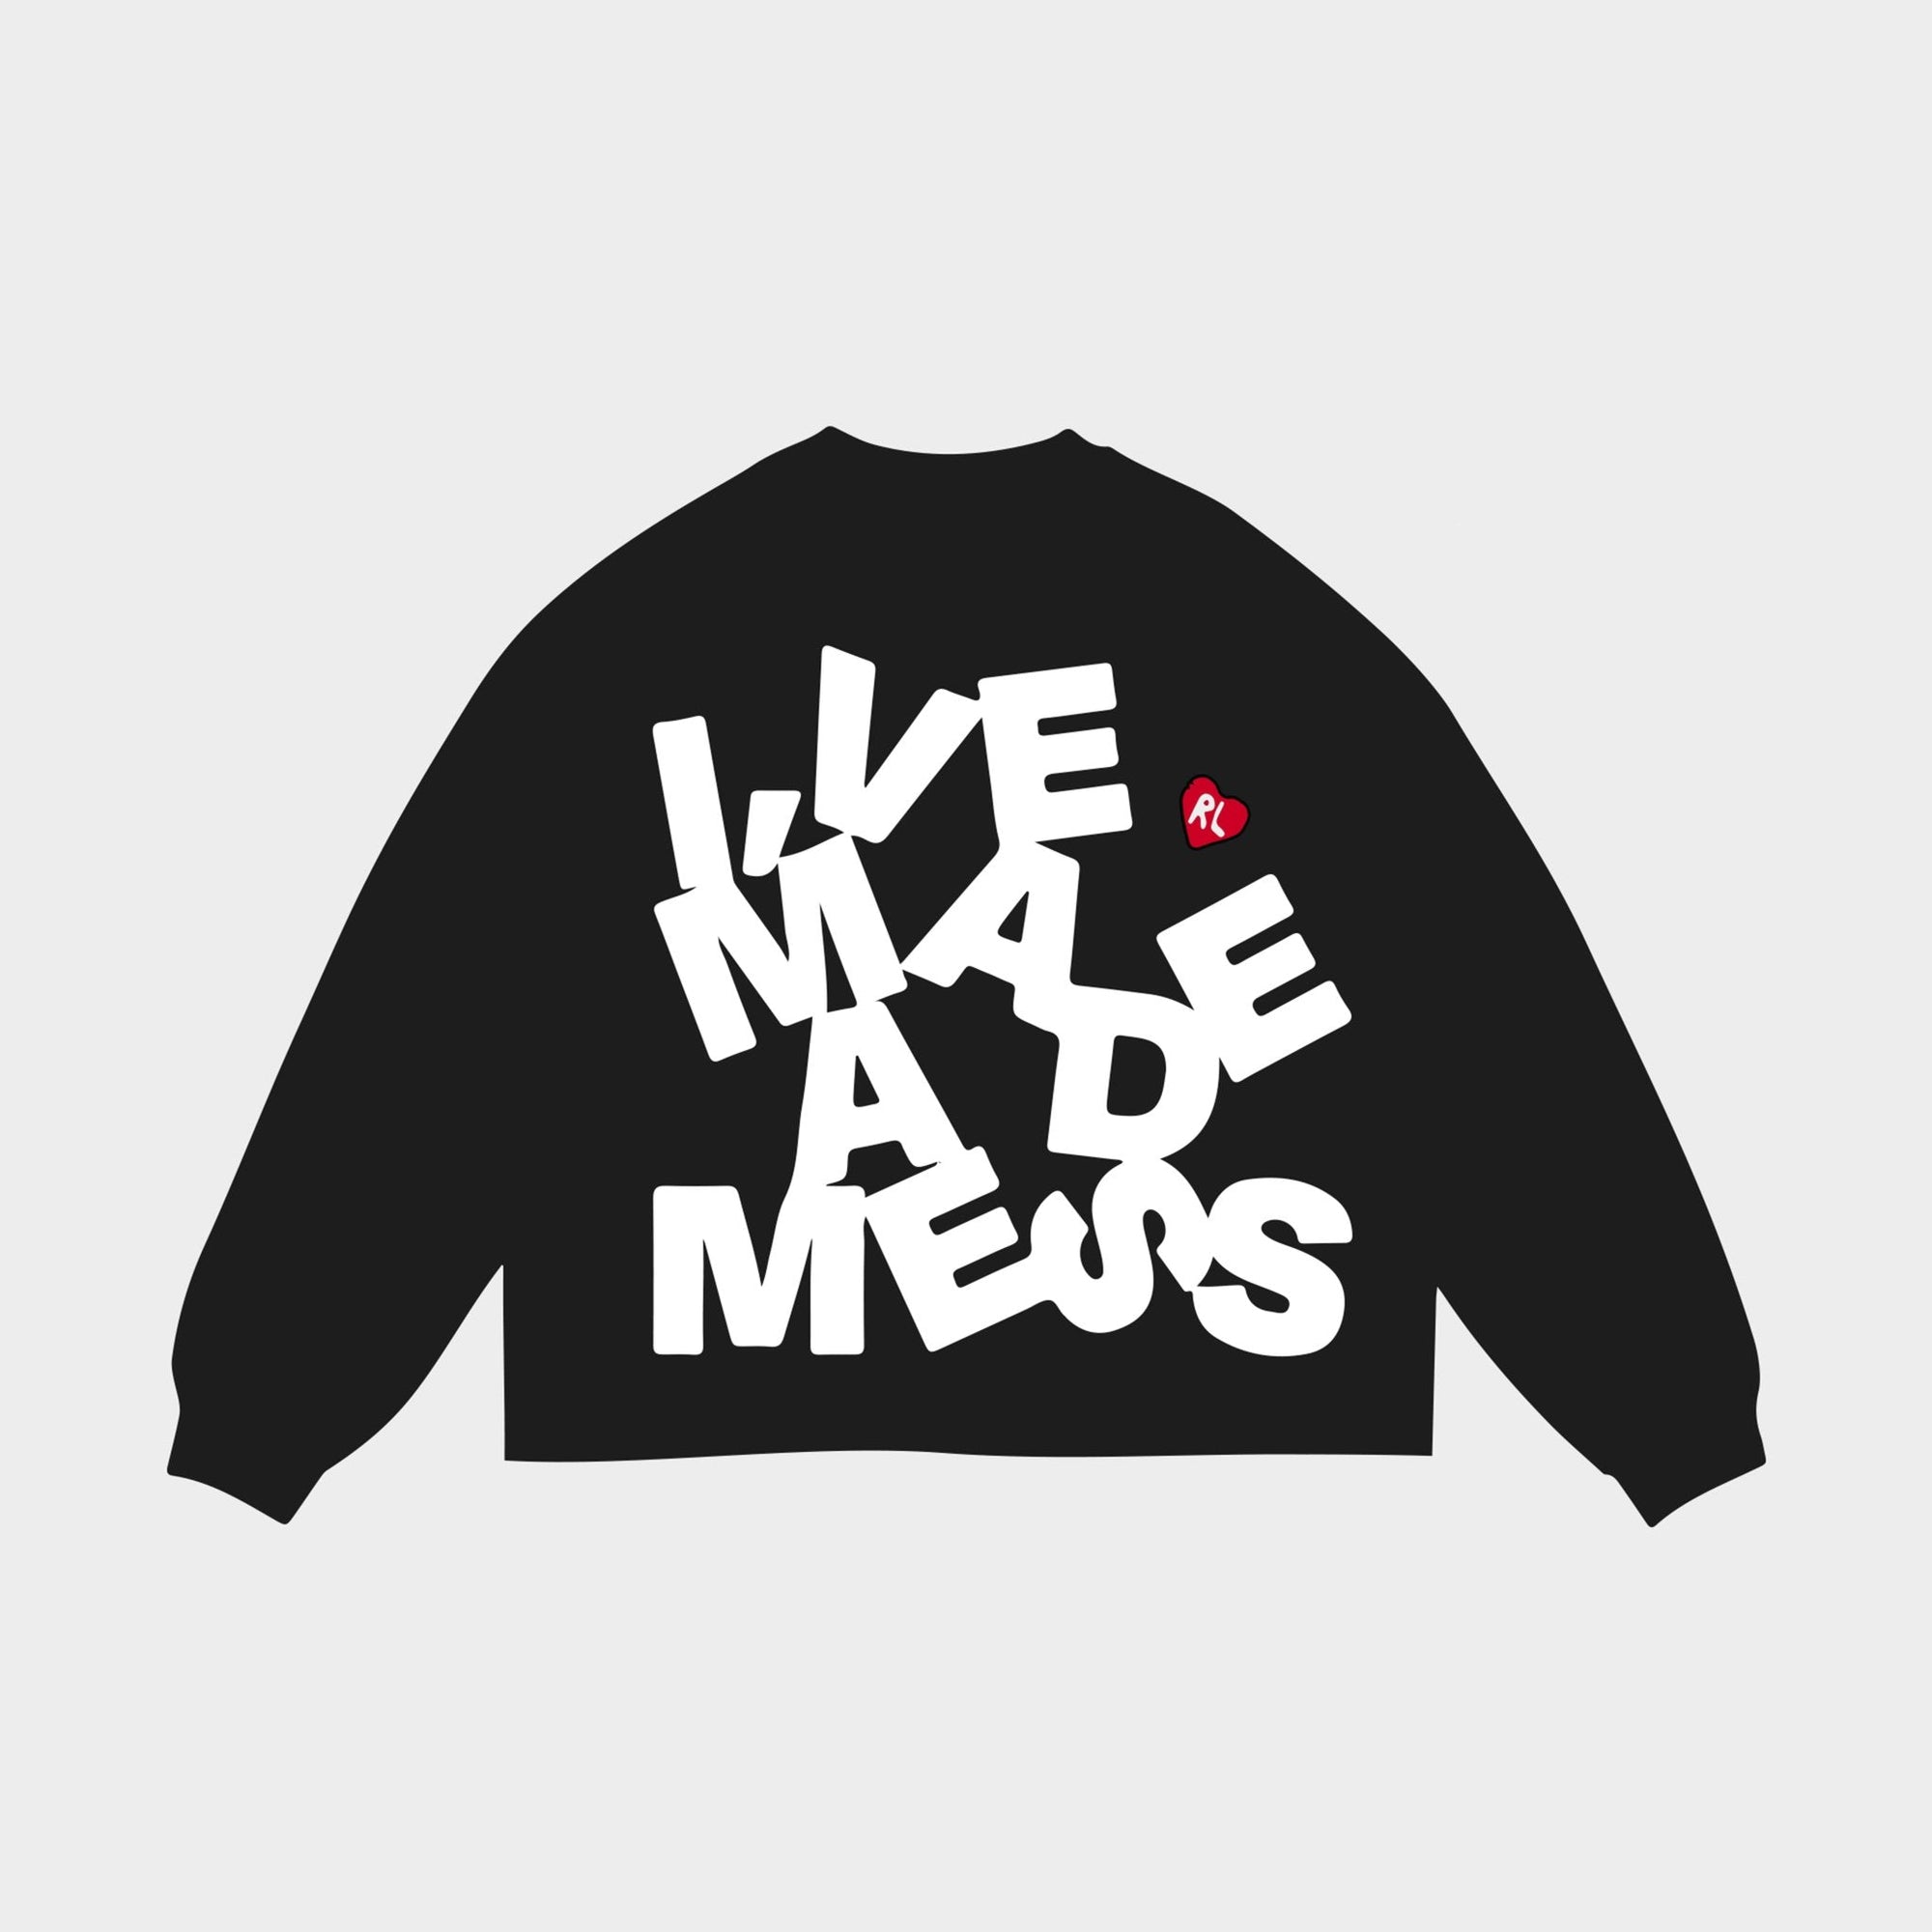 "Made a Mess" Crewneck Sweatshirt - RED LETTERS